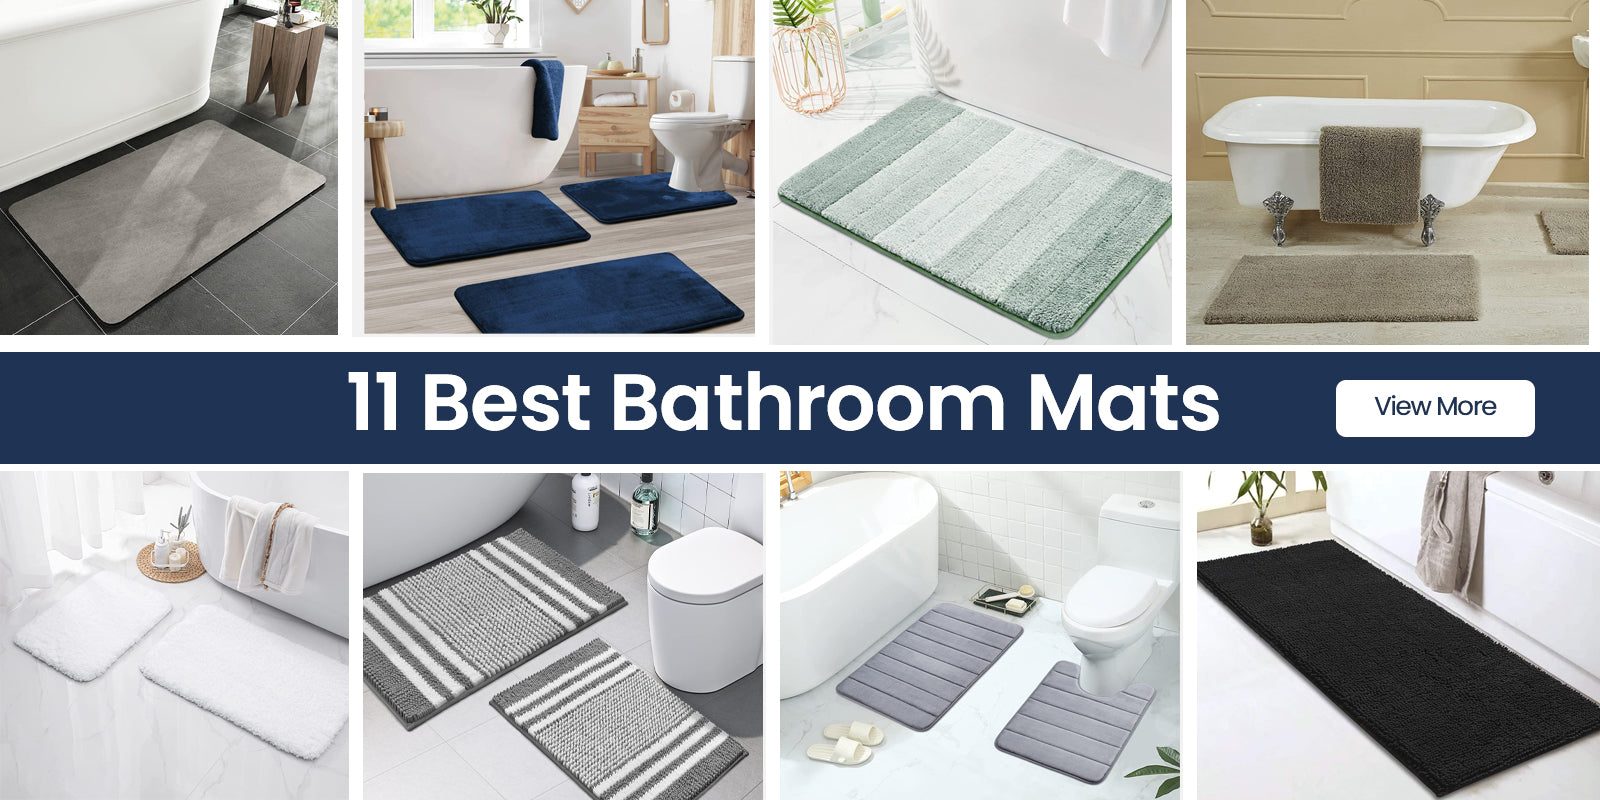 5 Best Antimicrobial Bath Mats in 2023, According to a Microbiologist -  Brightly